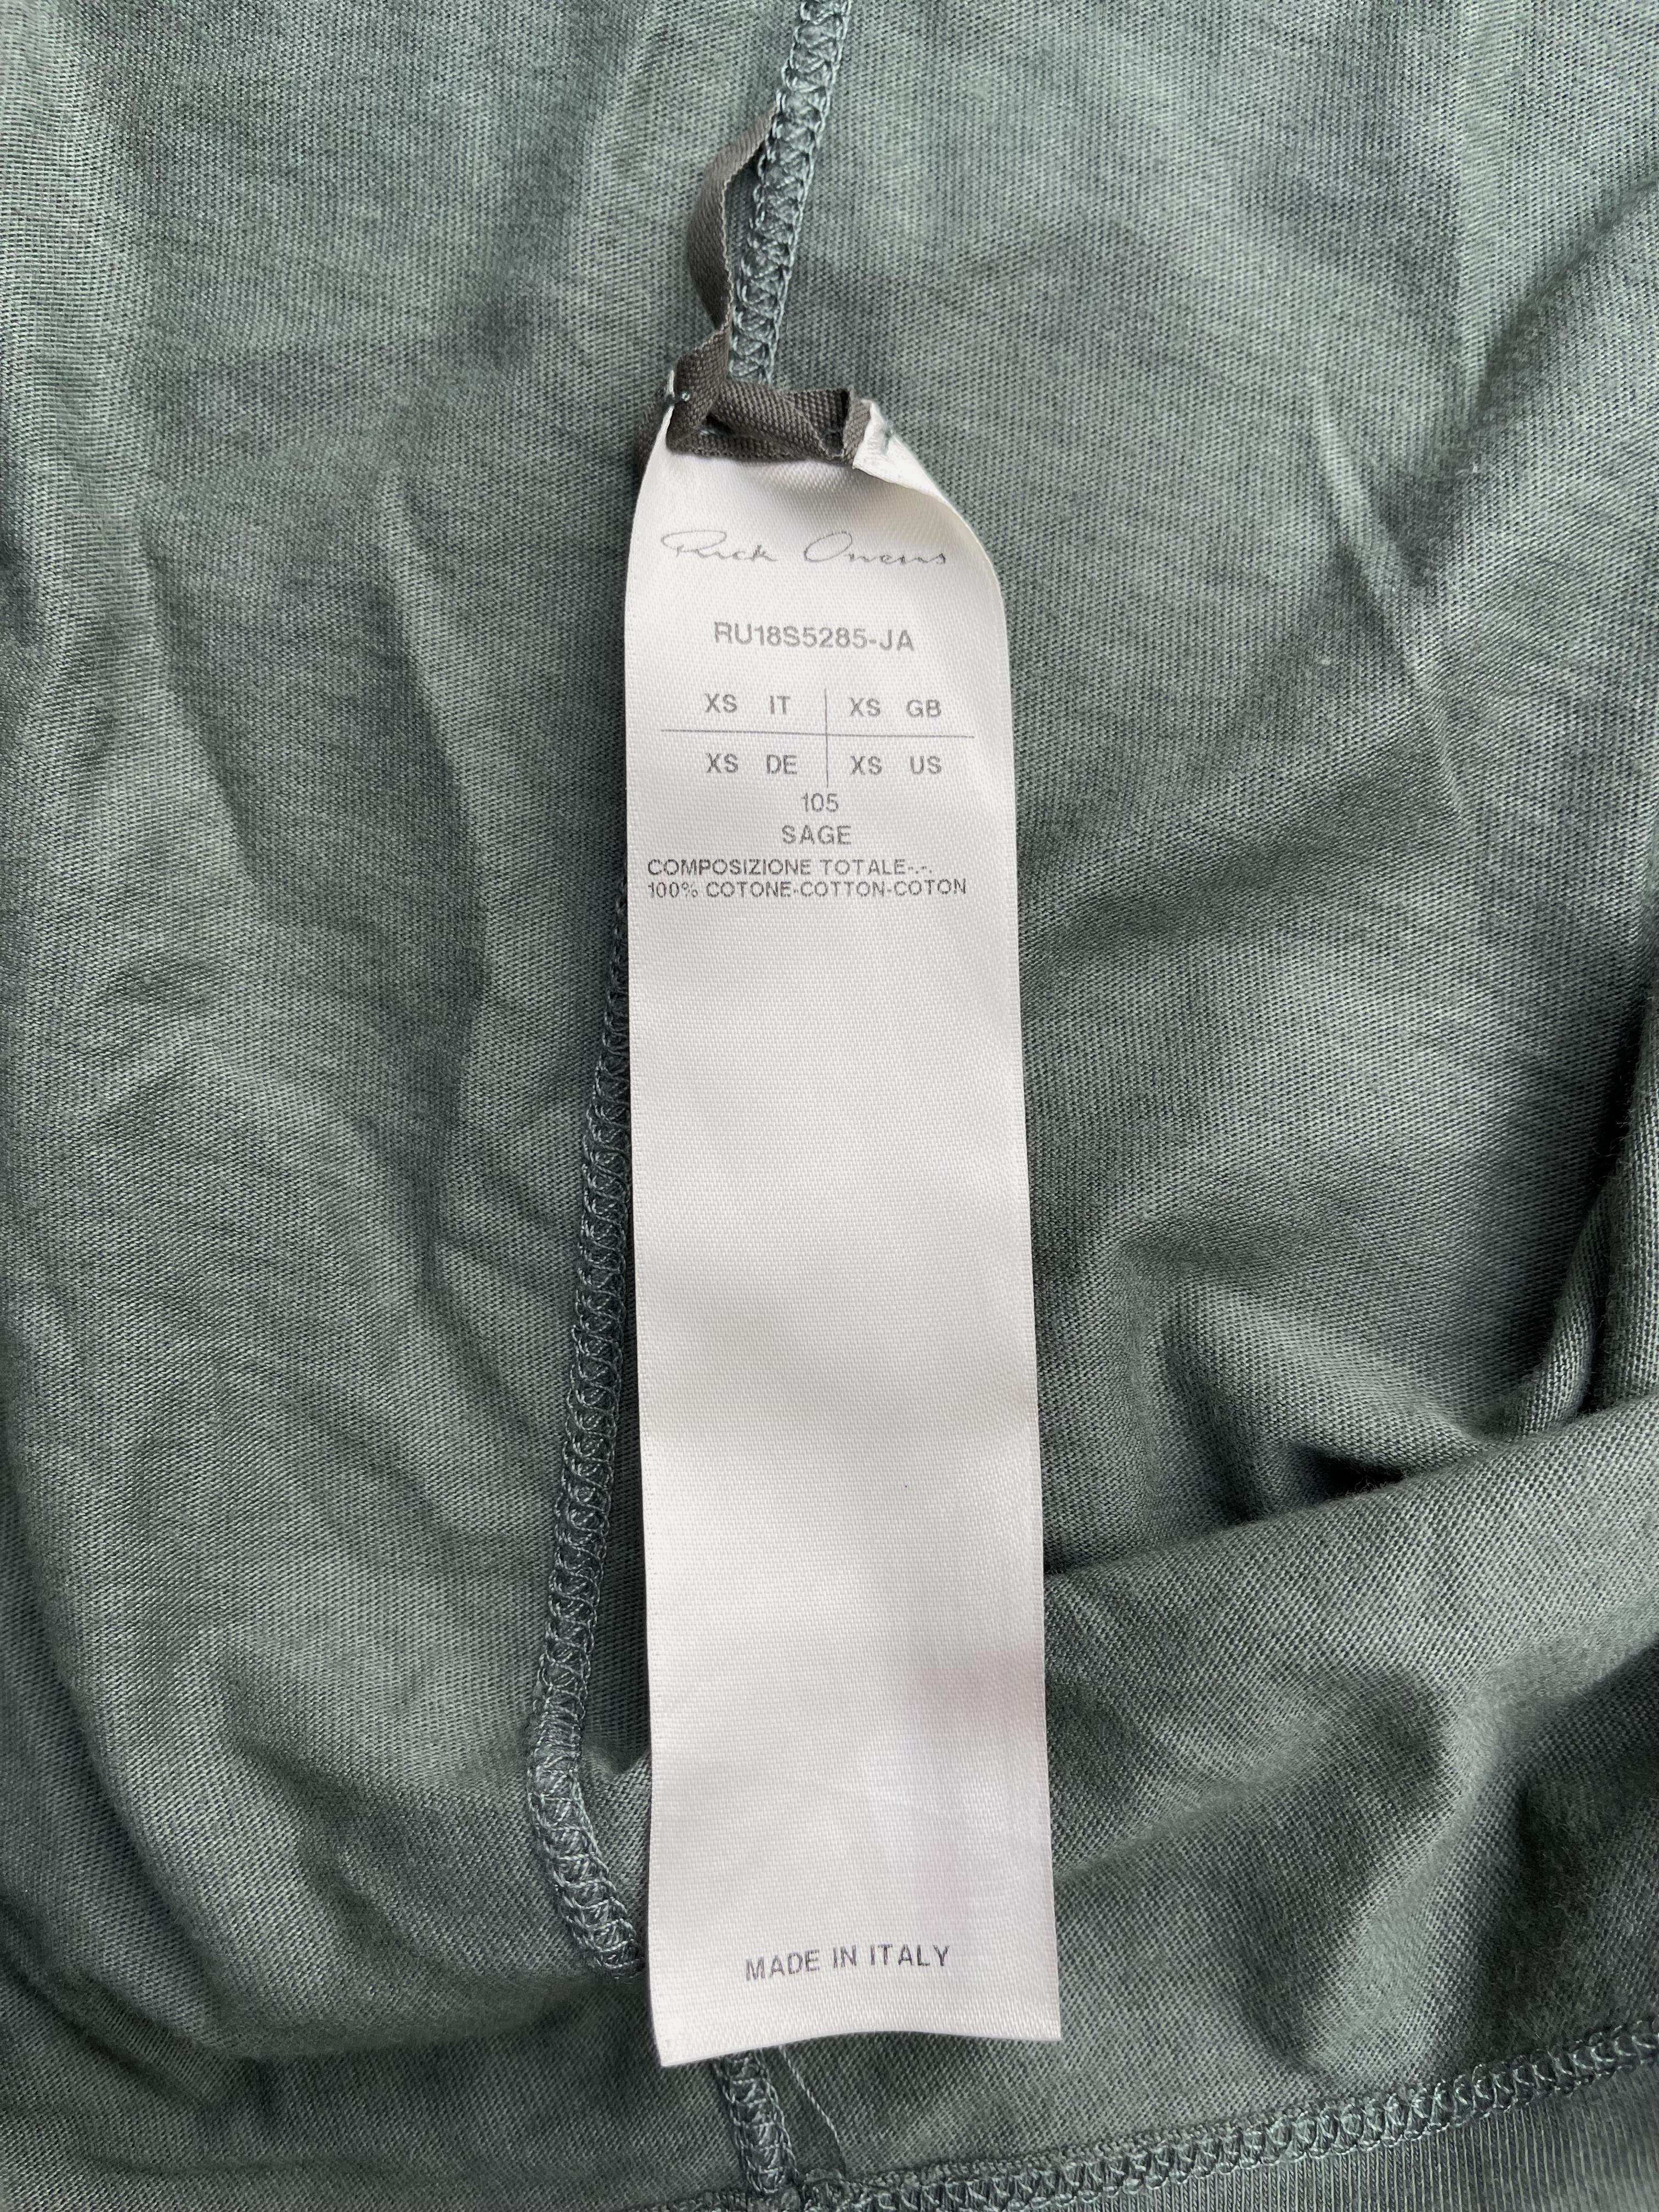 Rick Owens “Dirt” Jumbo Hoodie, Spring Summer 2018 In Excellent Condition For Sale In Tương Mai Ward, Hoang Mai District